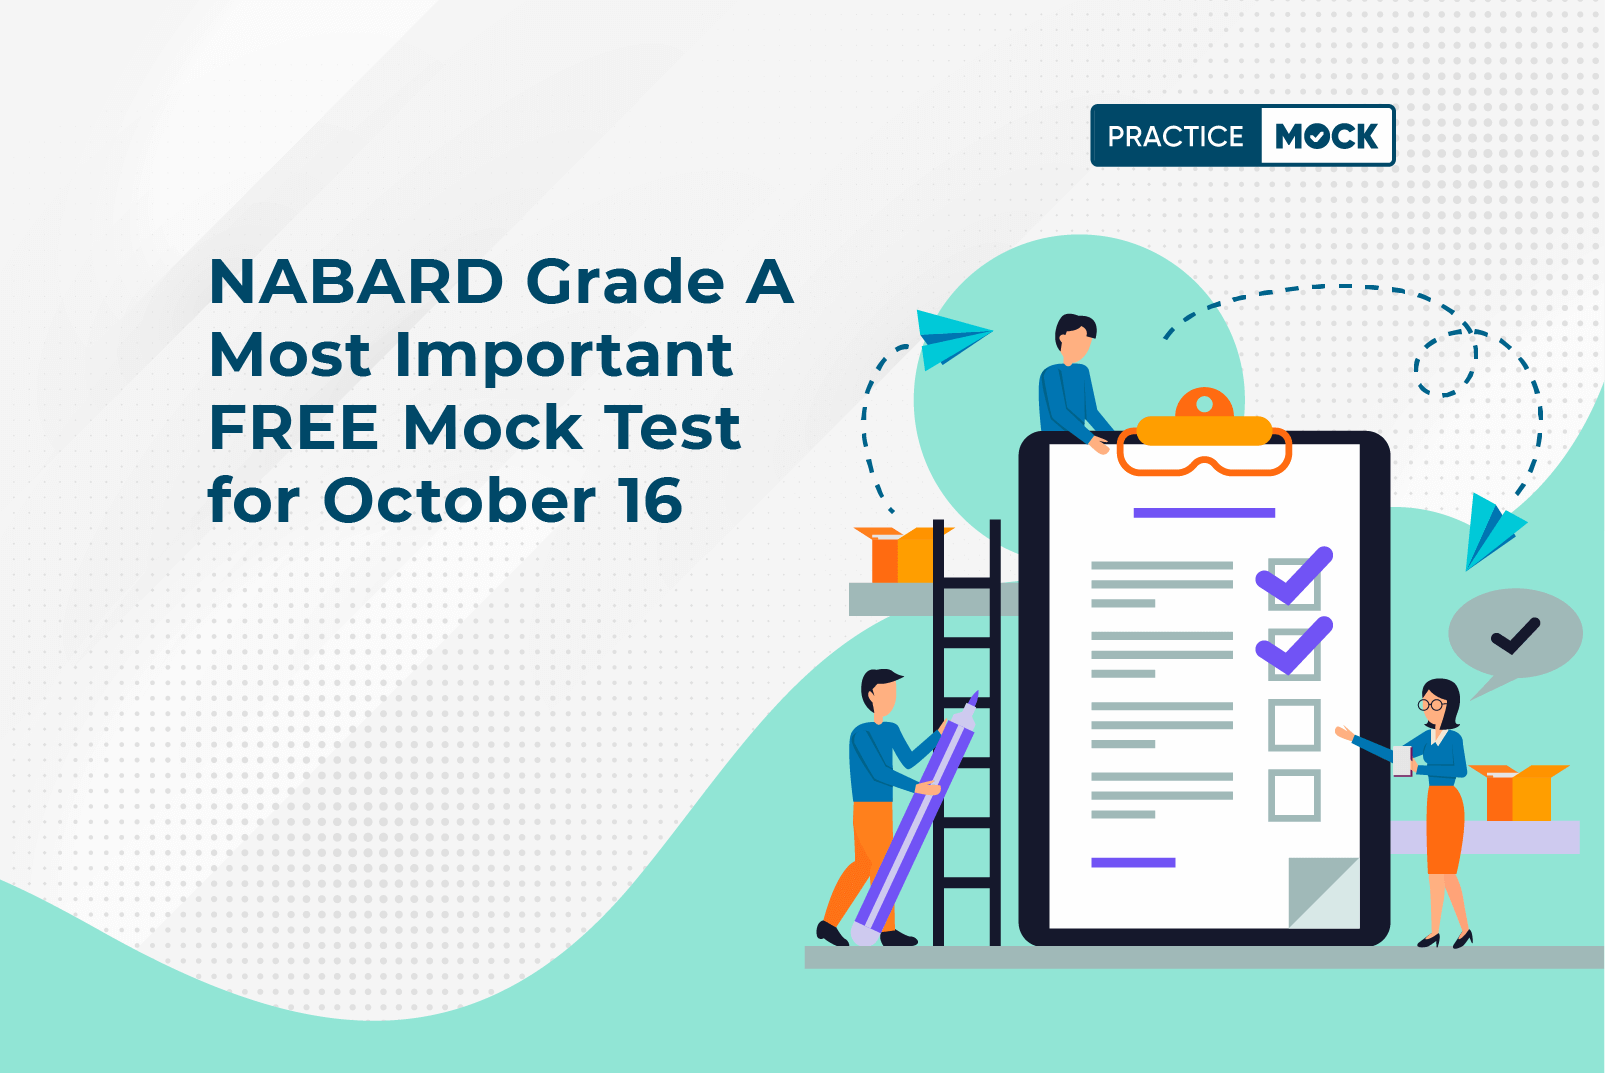 NABARD Grade A Most Important FREE Mock Test for Oct 16